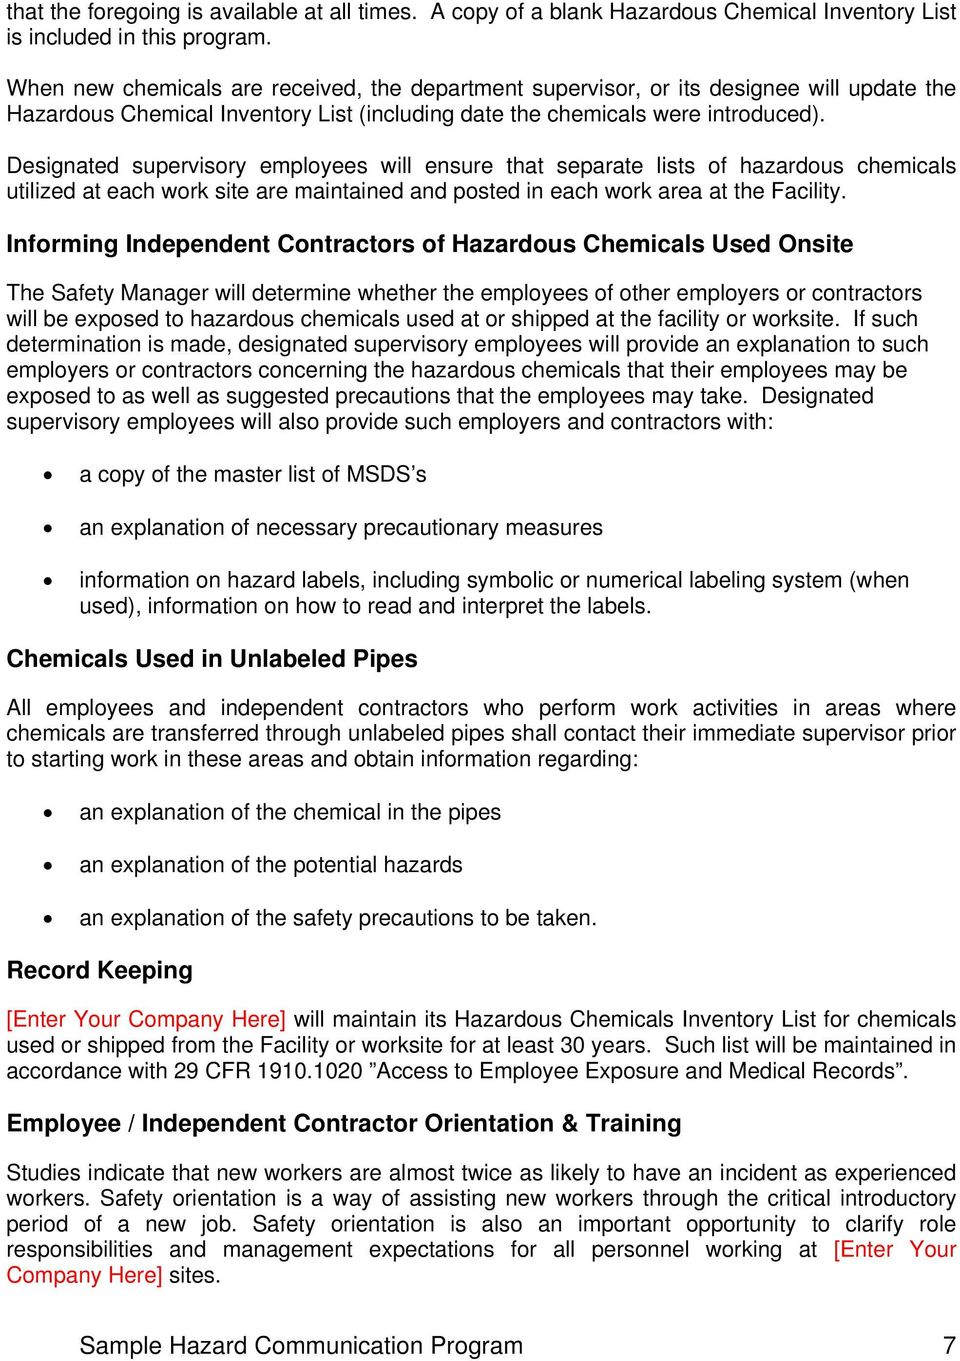 Designated supervisory employees will ensure that separate lists of hazardous chemicals utilized at each work site are maintained and posted in each work area at the Facility.